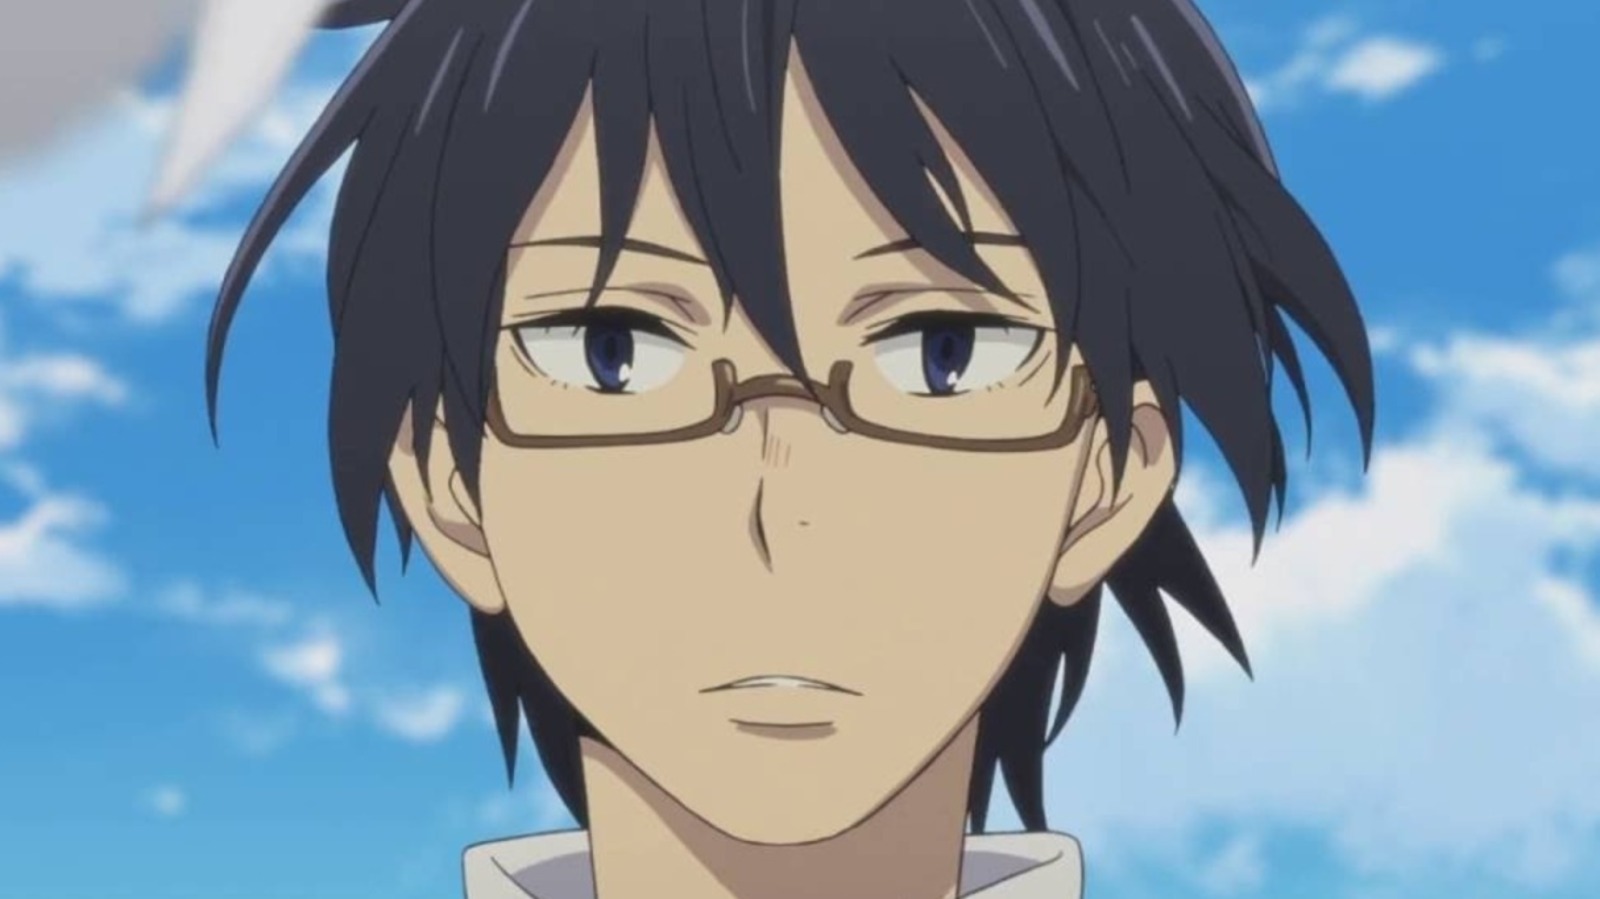 Erased Season 2 Release Date, Plot And Cast - What We Know So Far